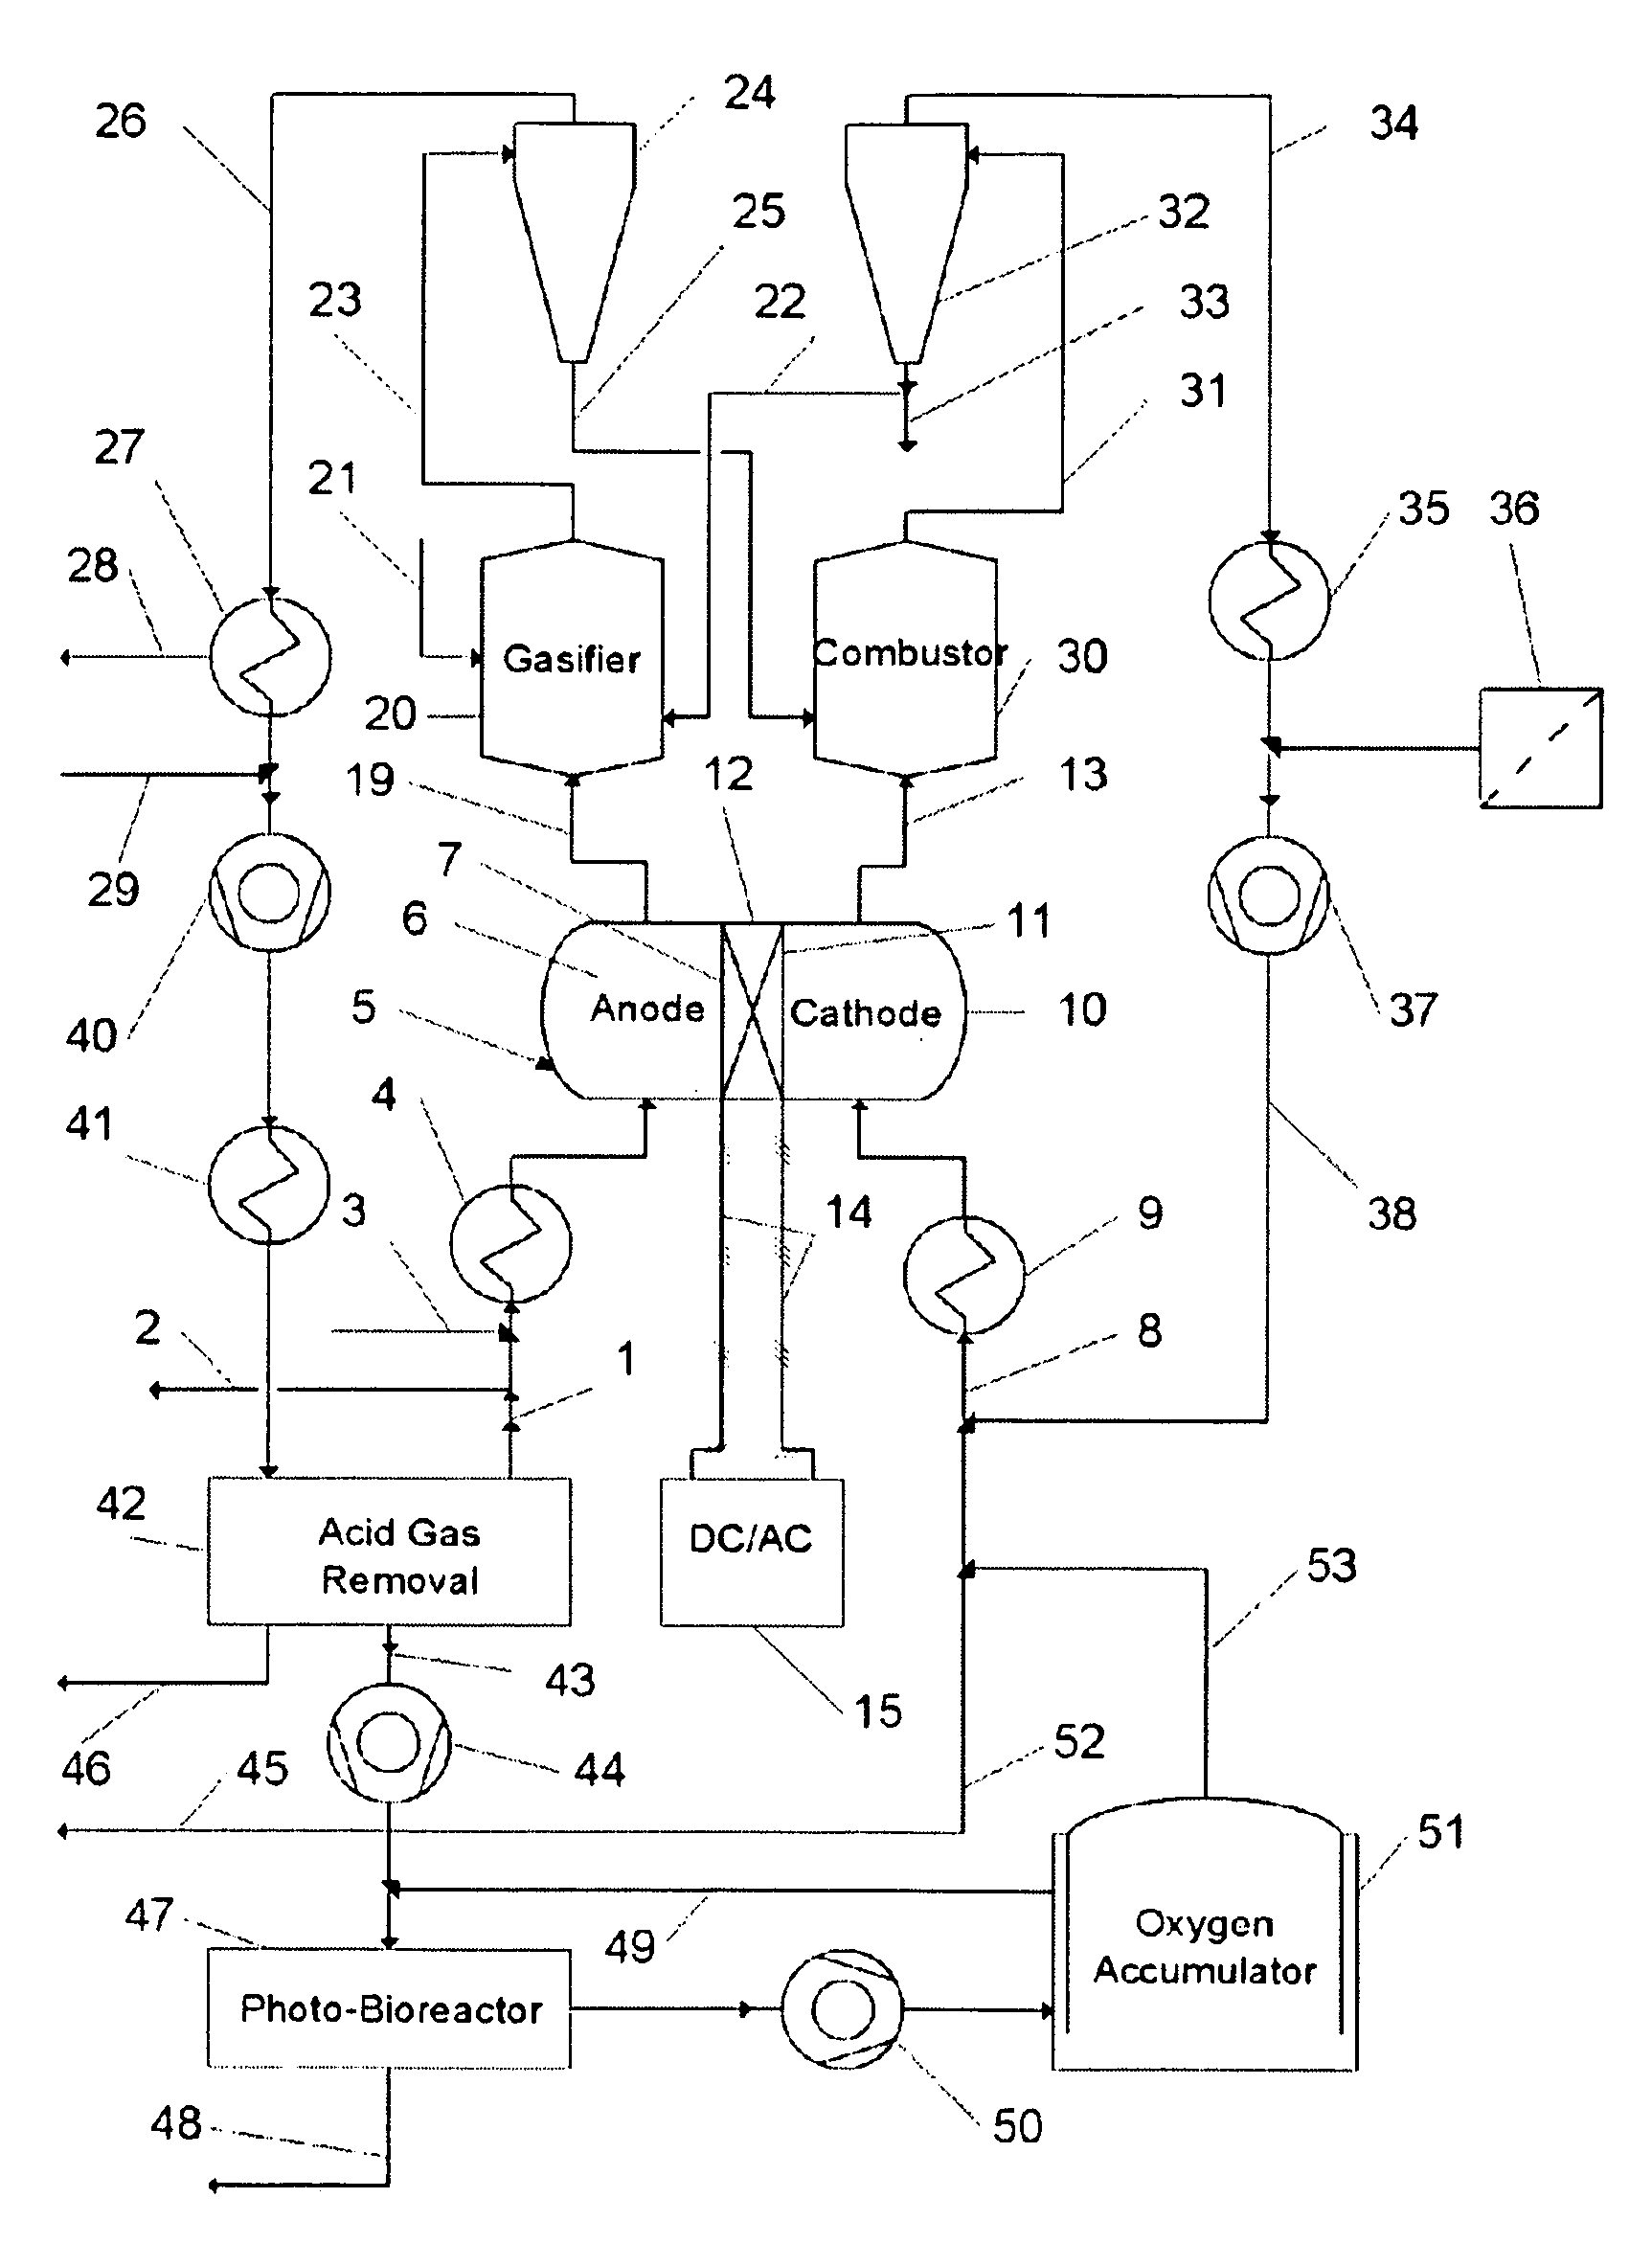 Electricity, heat and fuel generation system using fuel cell, bioreactor and twin-fluid bed steam gasifier